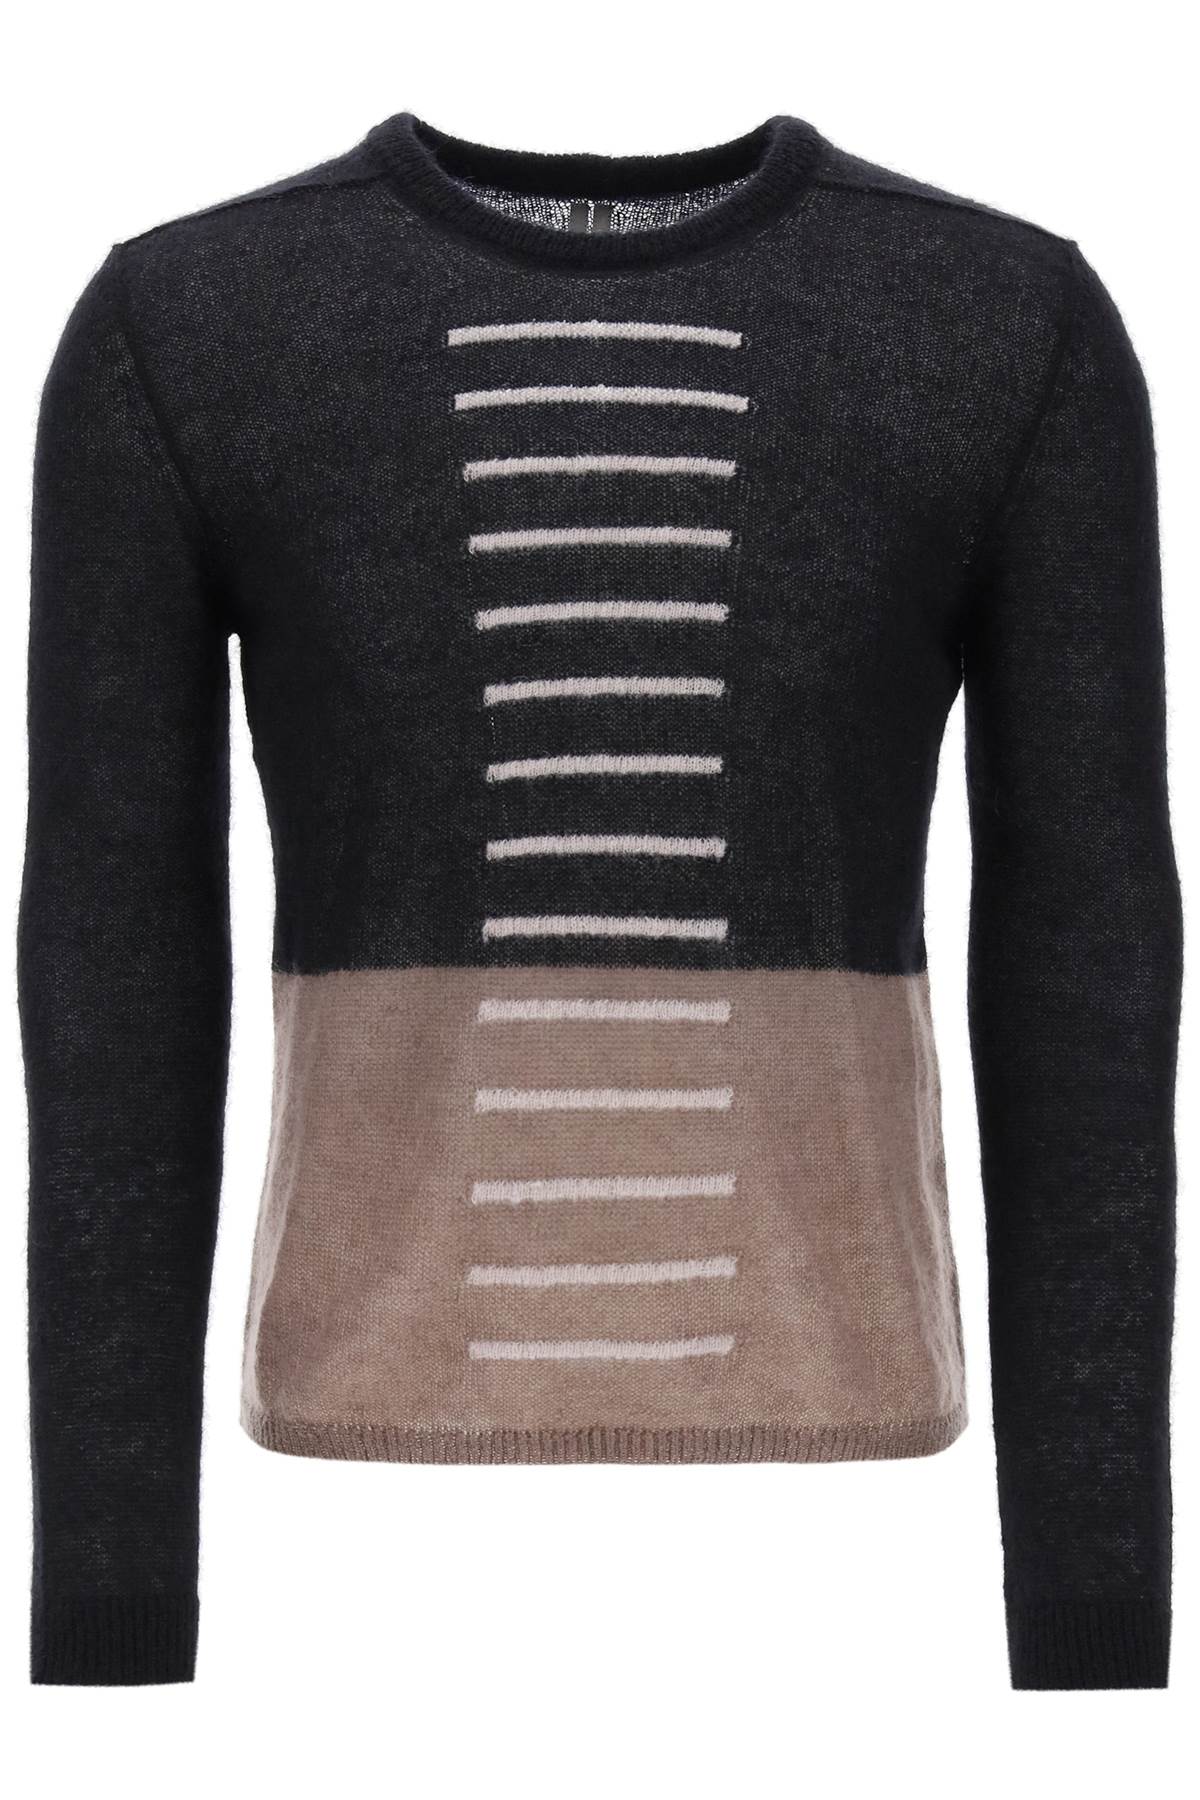 RICK OWENS JUDD SWEATER WITH CONTRASTING LINES